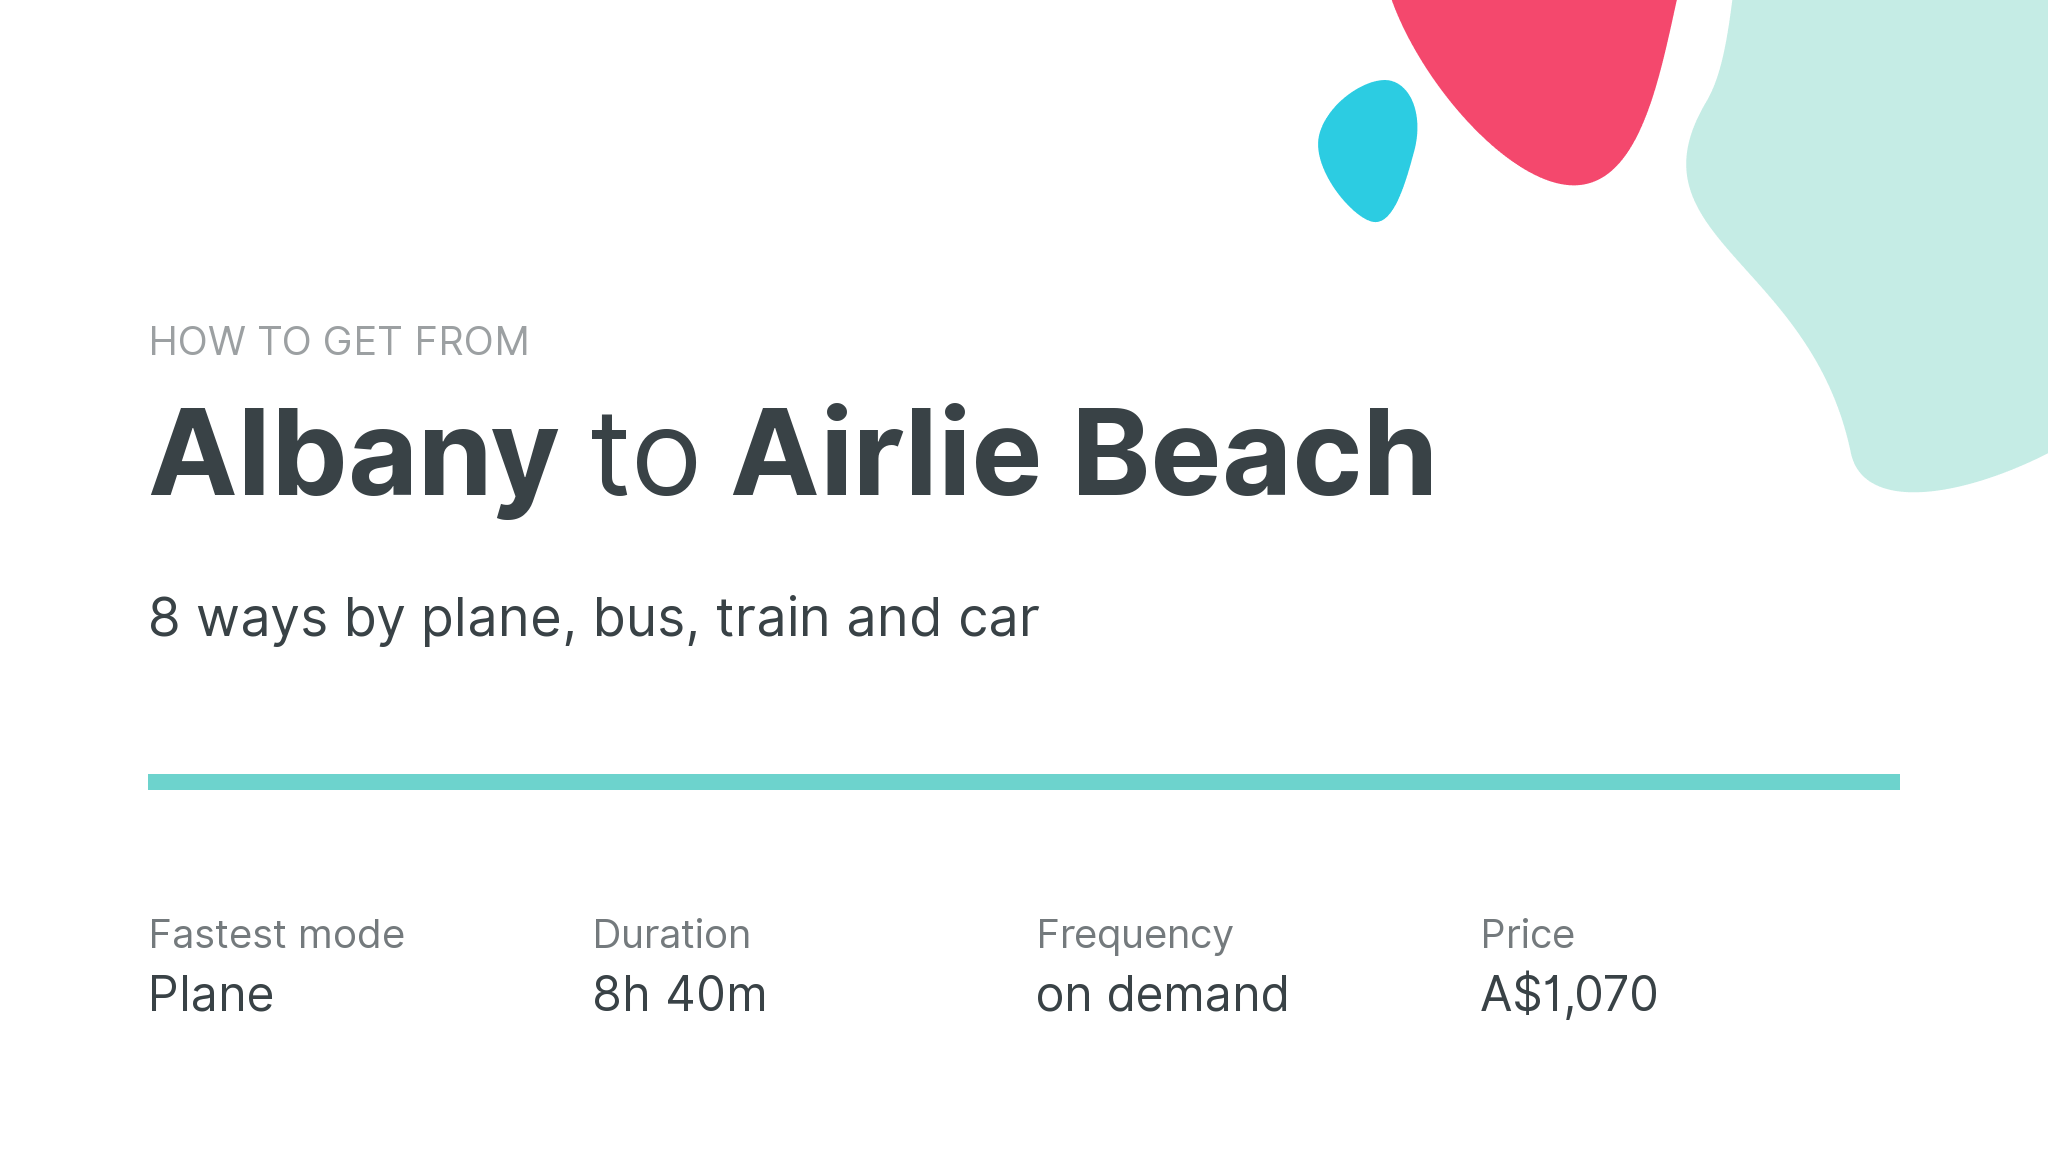 How do I get from Albany to Airlie Beach